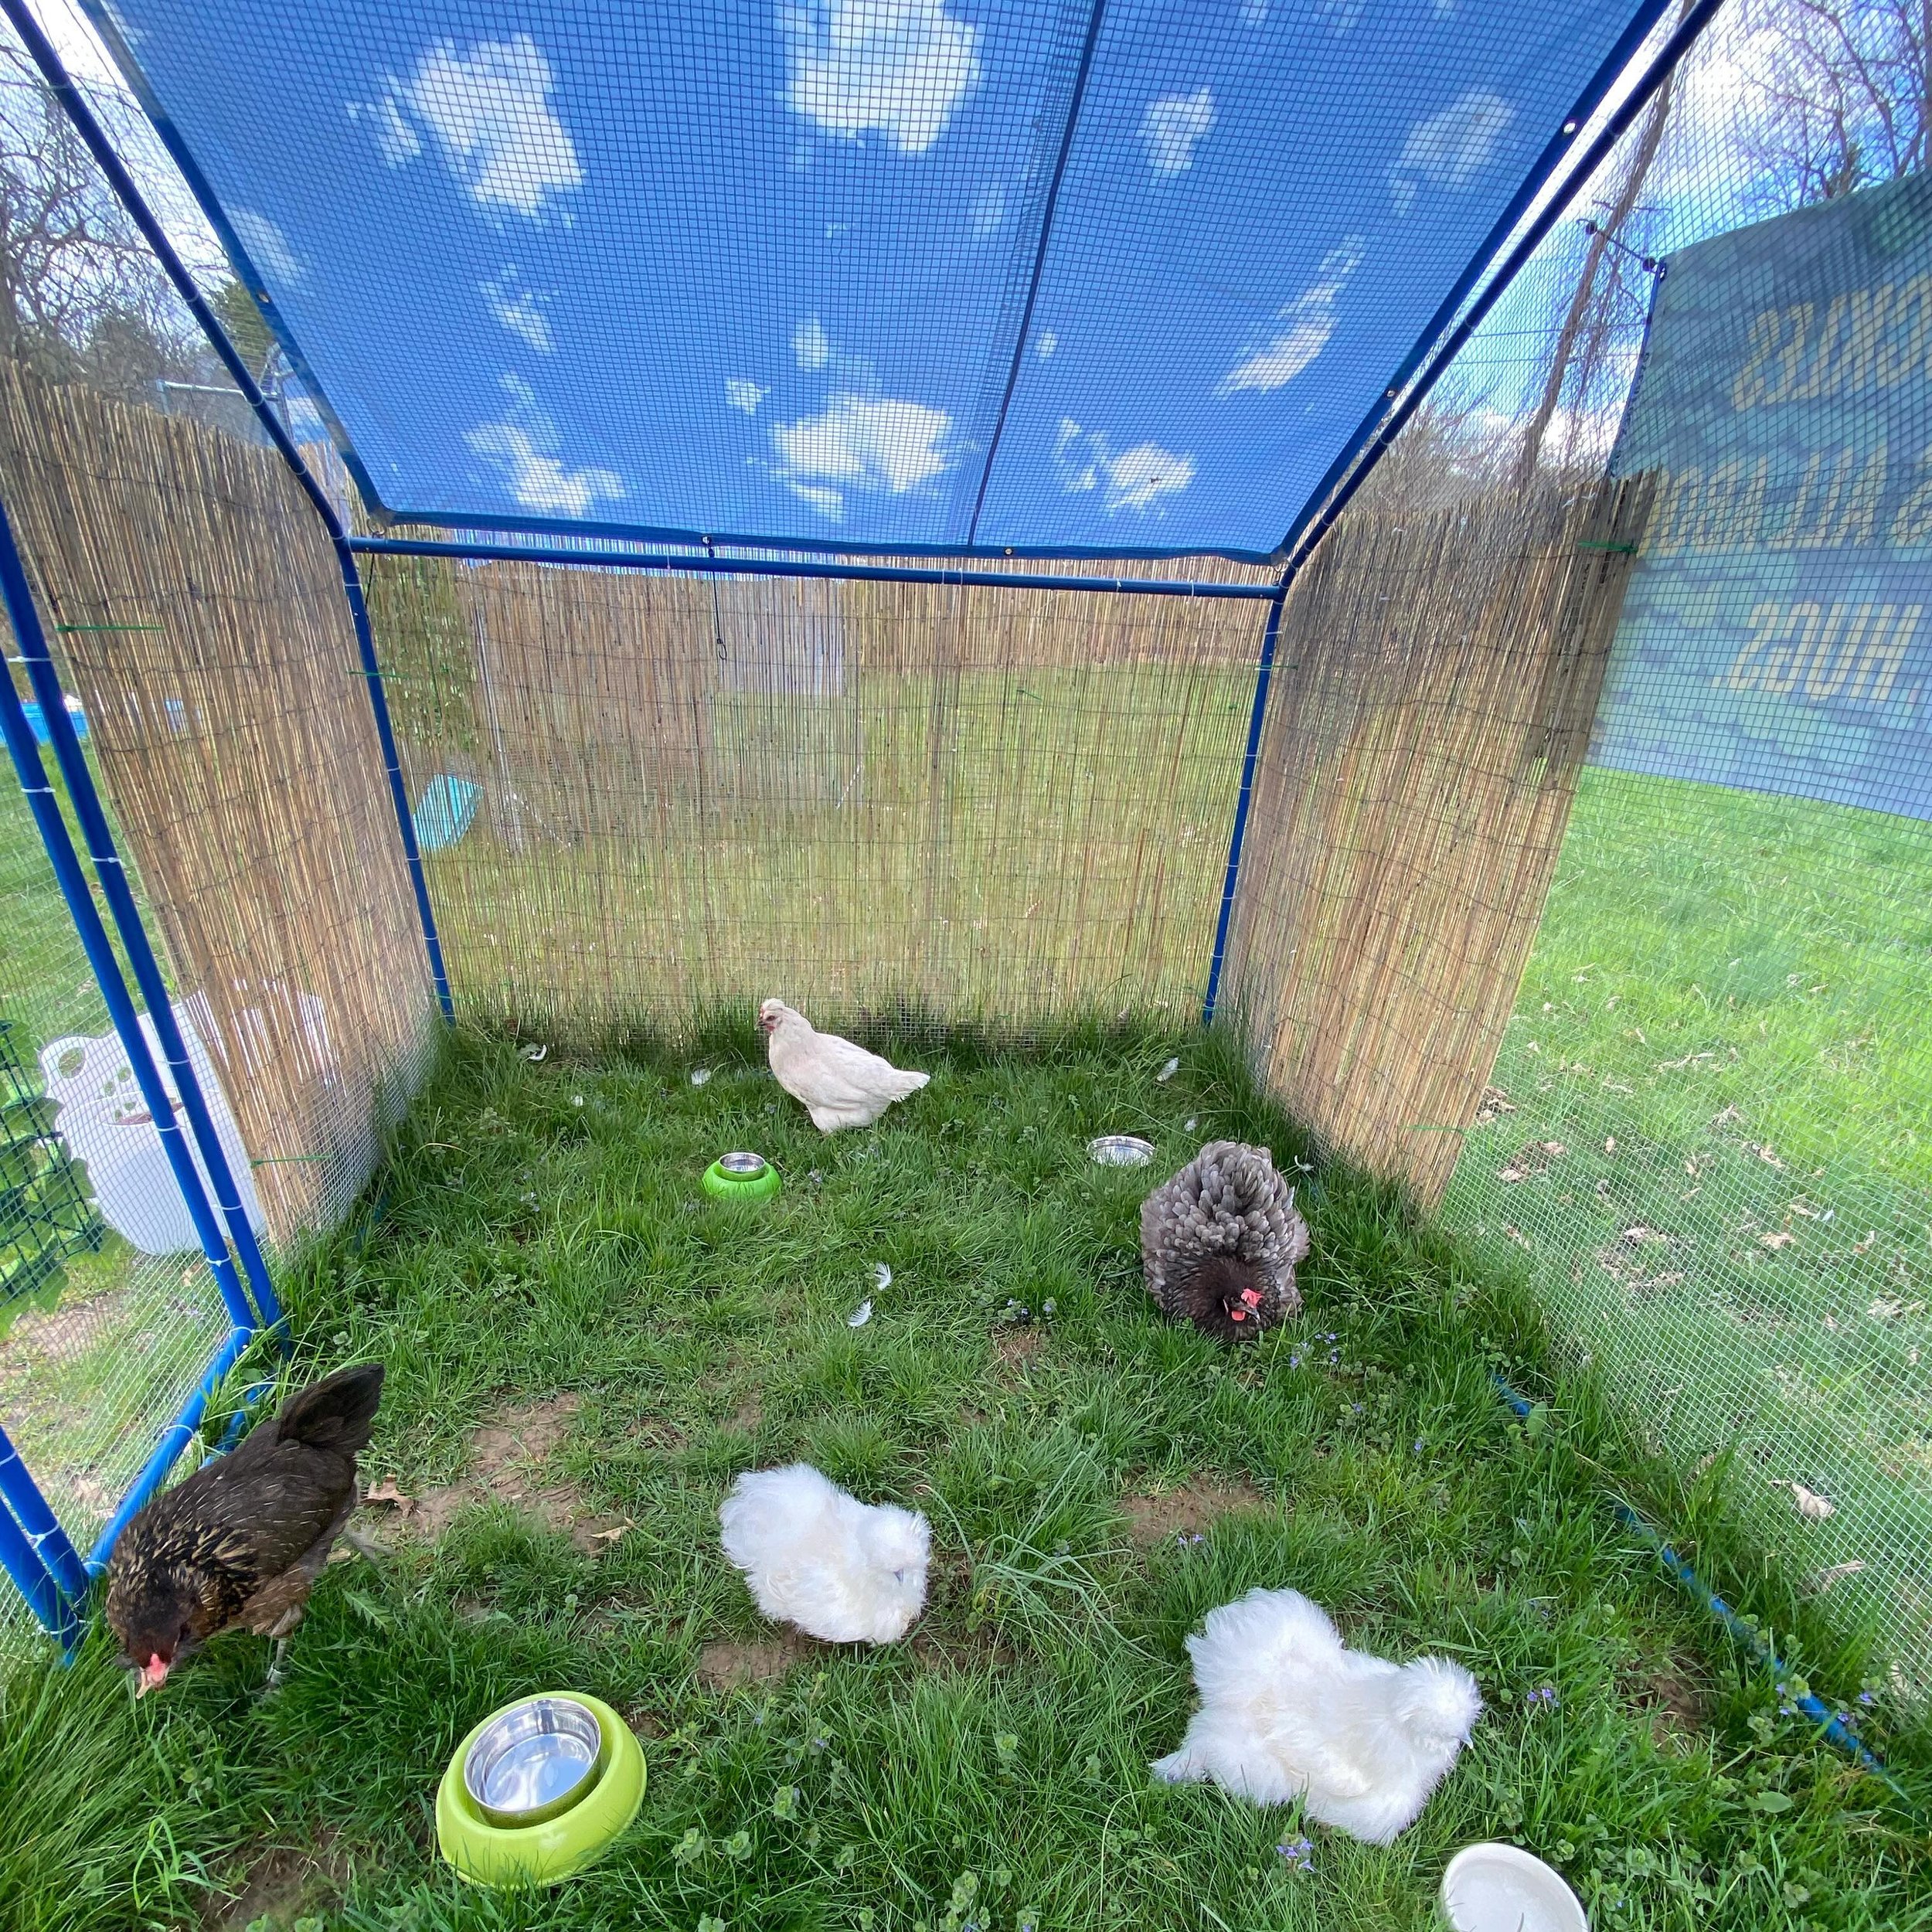 The Cloud Society is so happy to have a day of nice weather and get out in the grass. It means so much to the rescued residents to get past winter and be back outside with earth to root around in. 🥹🥰💗

#instituteforanimalhappiness